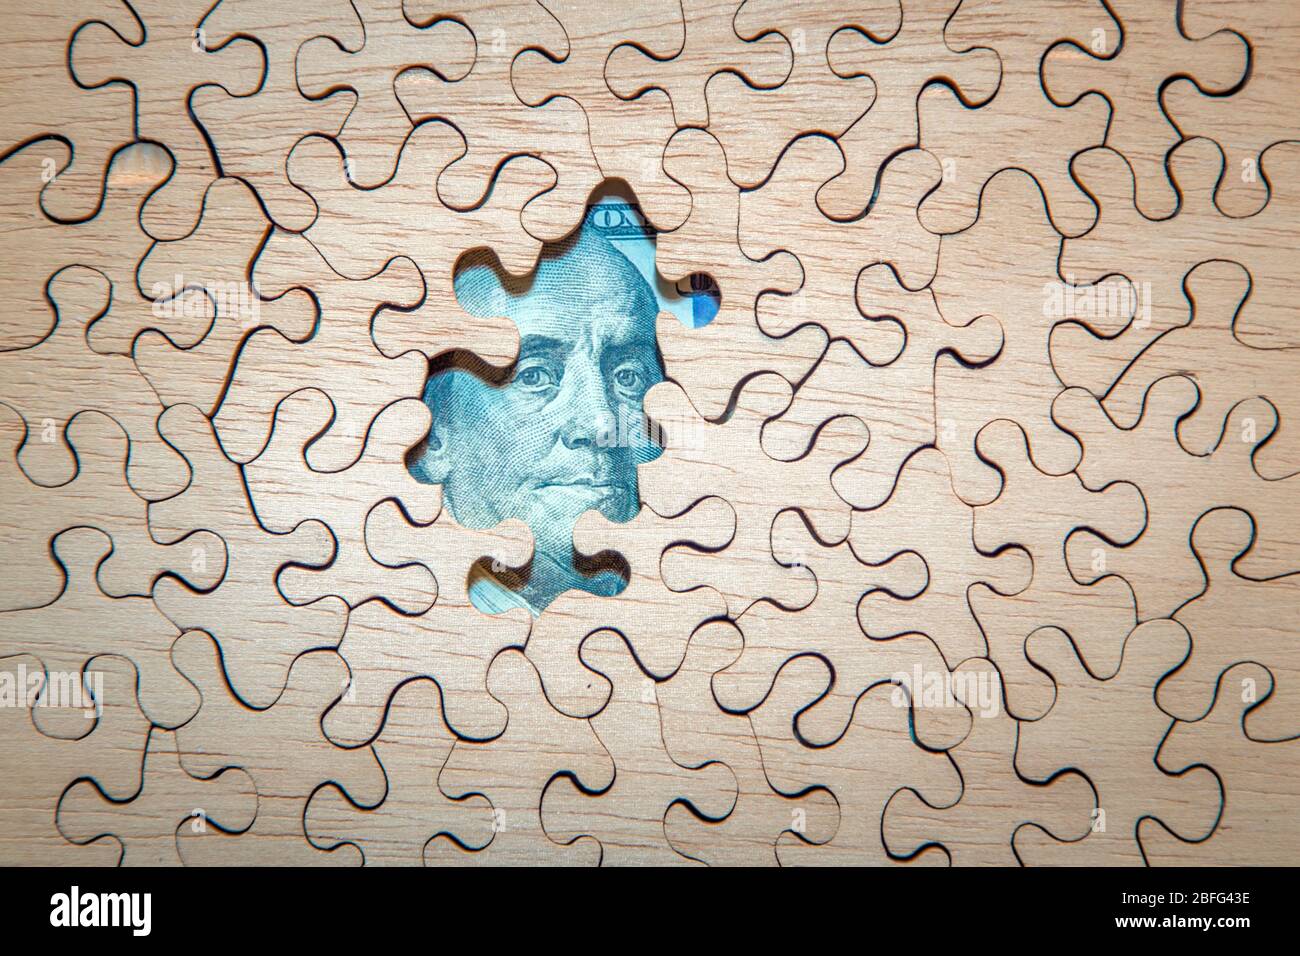 Benjamin Franklin on the $100 bill peeks through an unfinished jigsaw puzzle. Stock Photo